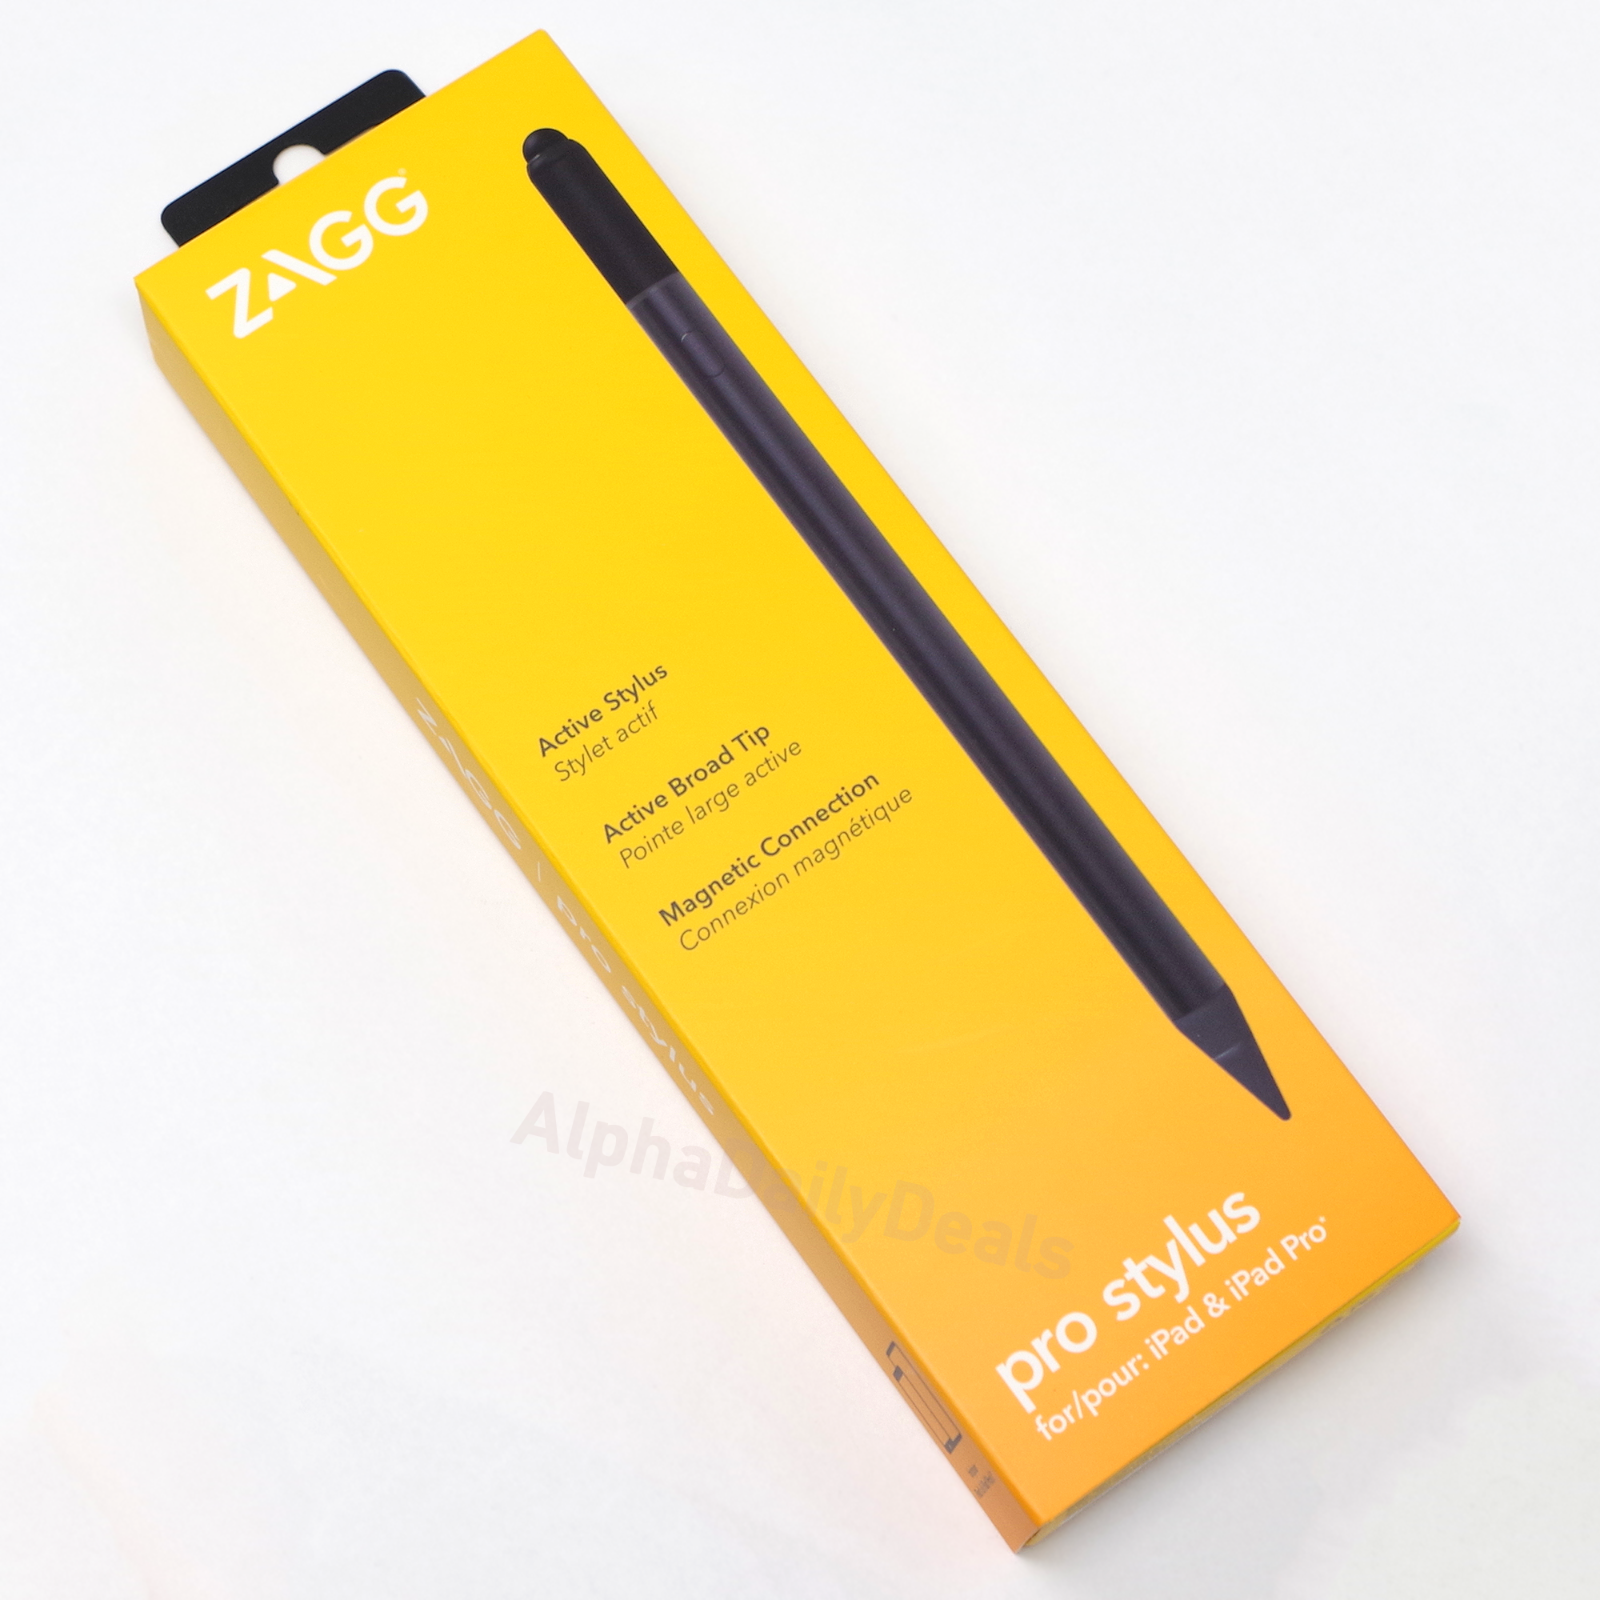 ZAGG Pro Stylus Active Capacitive Tips for iPad Pro Air Mini Tablet Magnetic